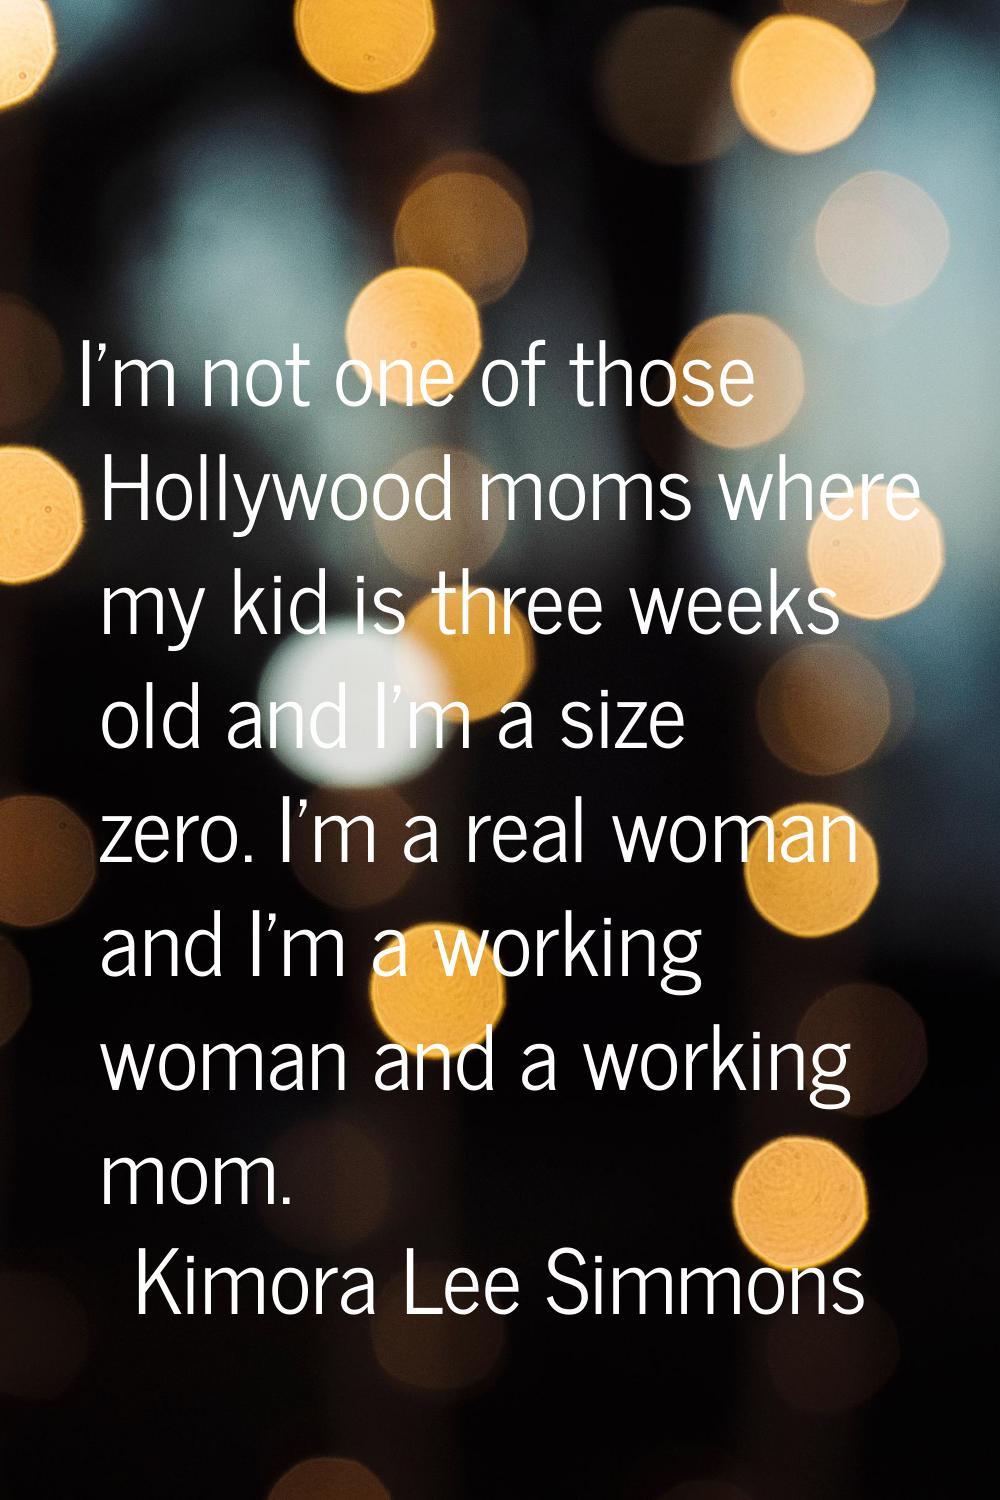 I'm not one of those Hollywood moms where my kid is three weeks old and I'm a size zero. I'm a real